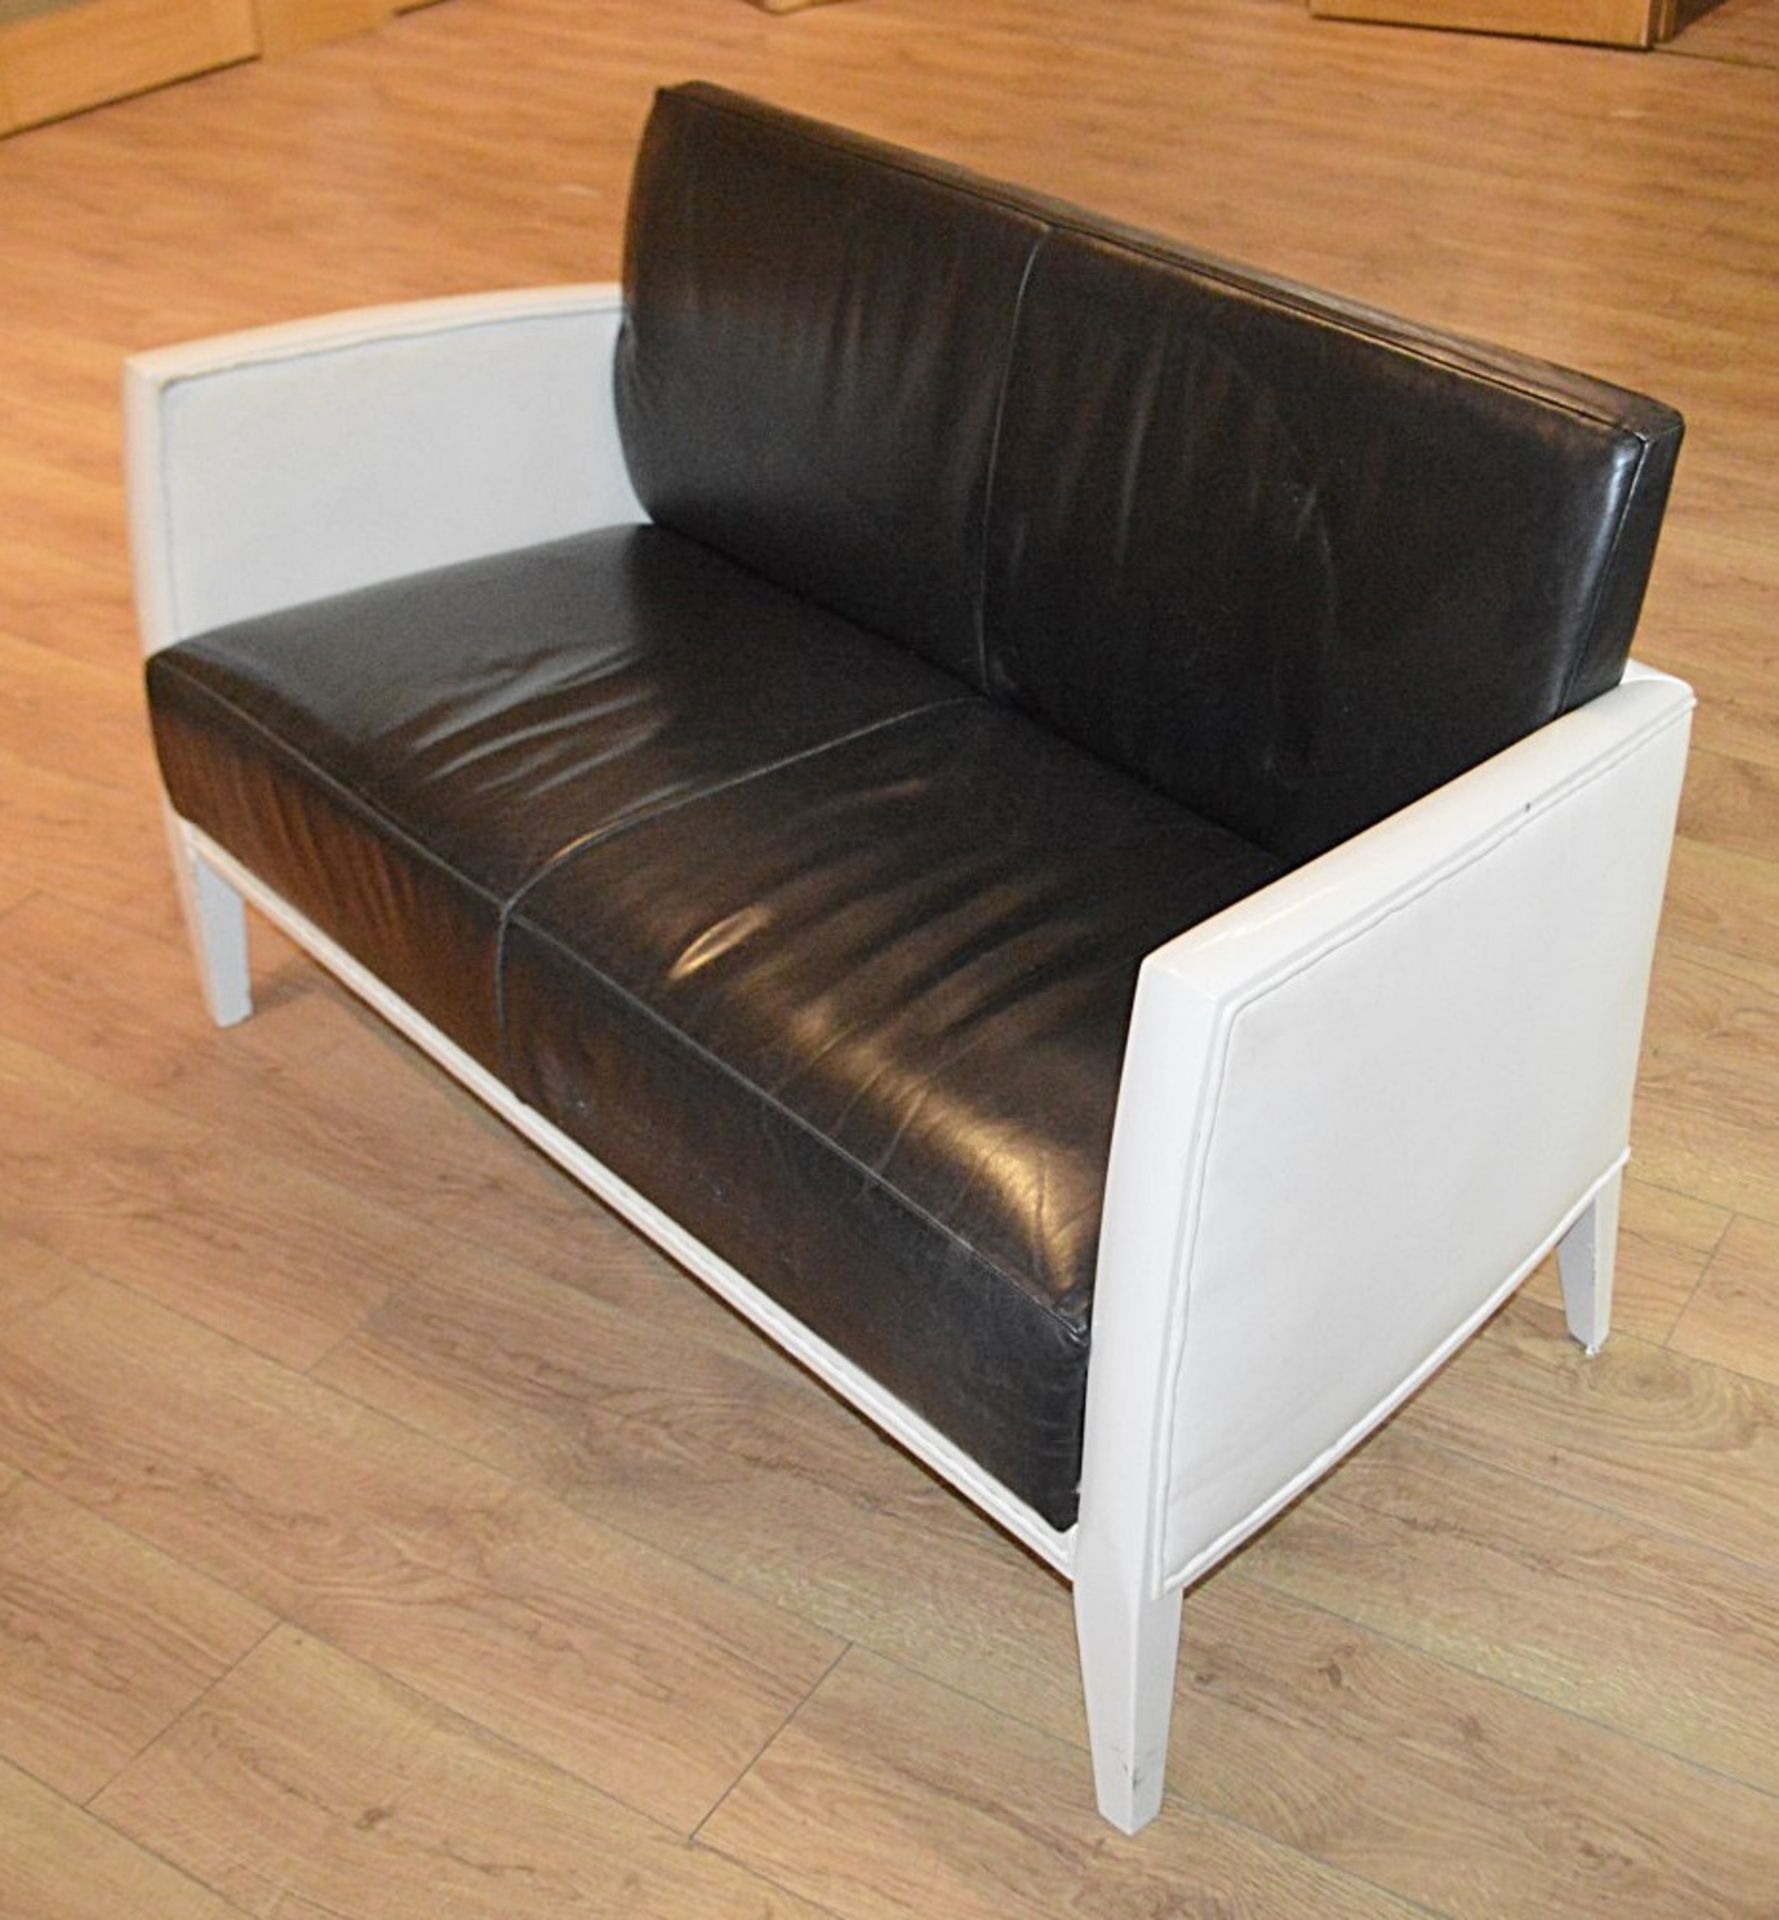 1 x Stylish Commercial Leather Upholstered 2-Seater Sofa With A High-Gloss Patent-Style Finish On - Image 7 of 7